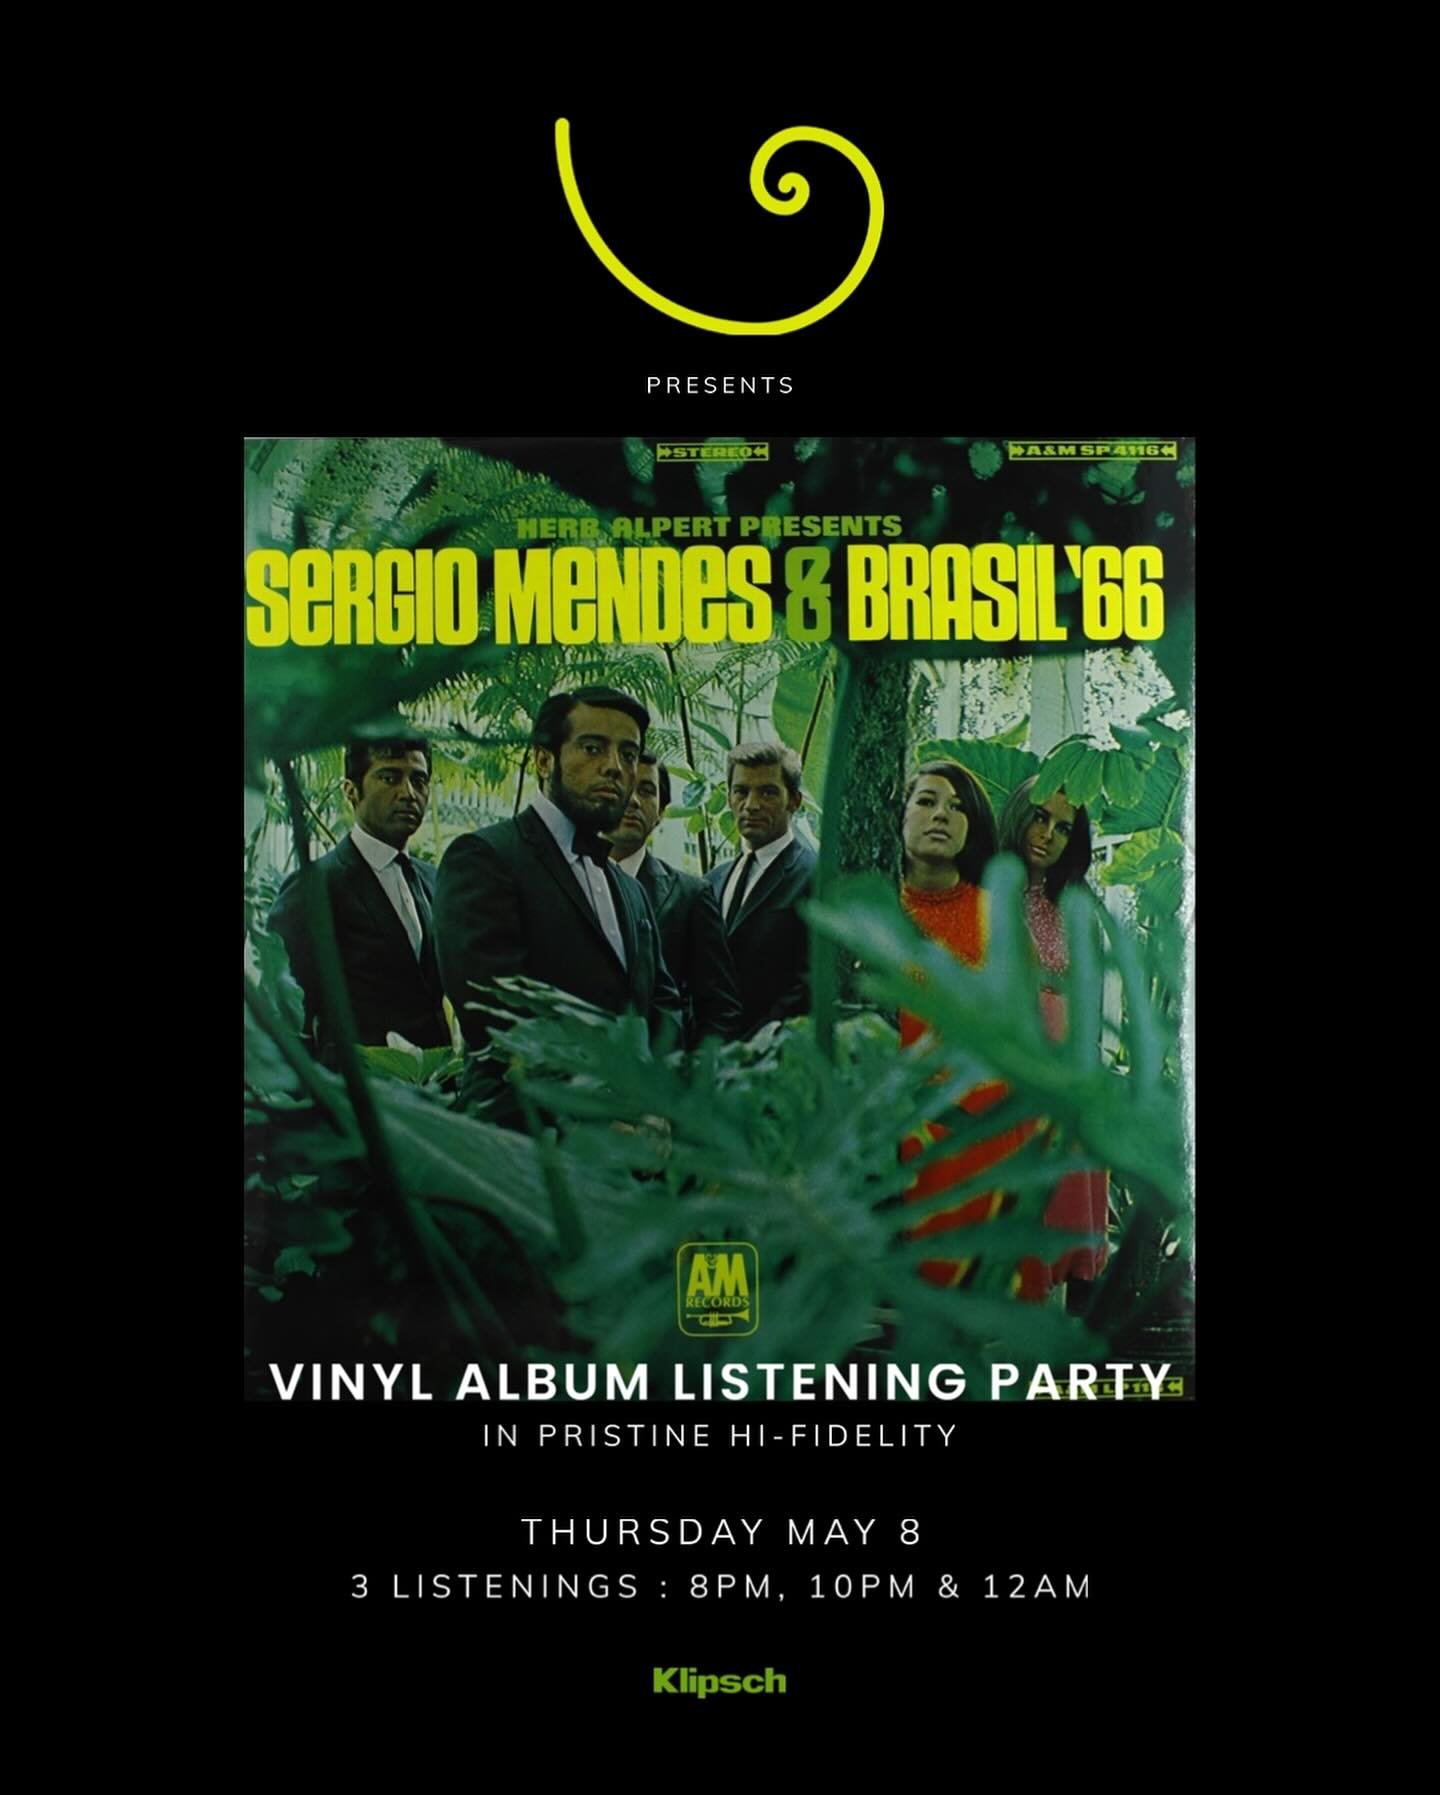 This weeks Vinyl Album Listening Party brings to us a Brazilian classic - @sergiomendesmusic &amp; Brasil &lsquo;66 

The album that produced the worldwide hit - &ldquo;Mas Que Nada&rdquo;. 

Sergio Mendes &amp; Brasil 66 had a profound impact on mus